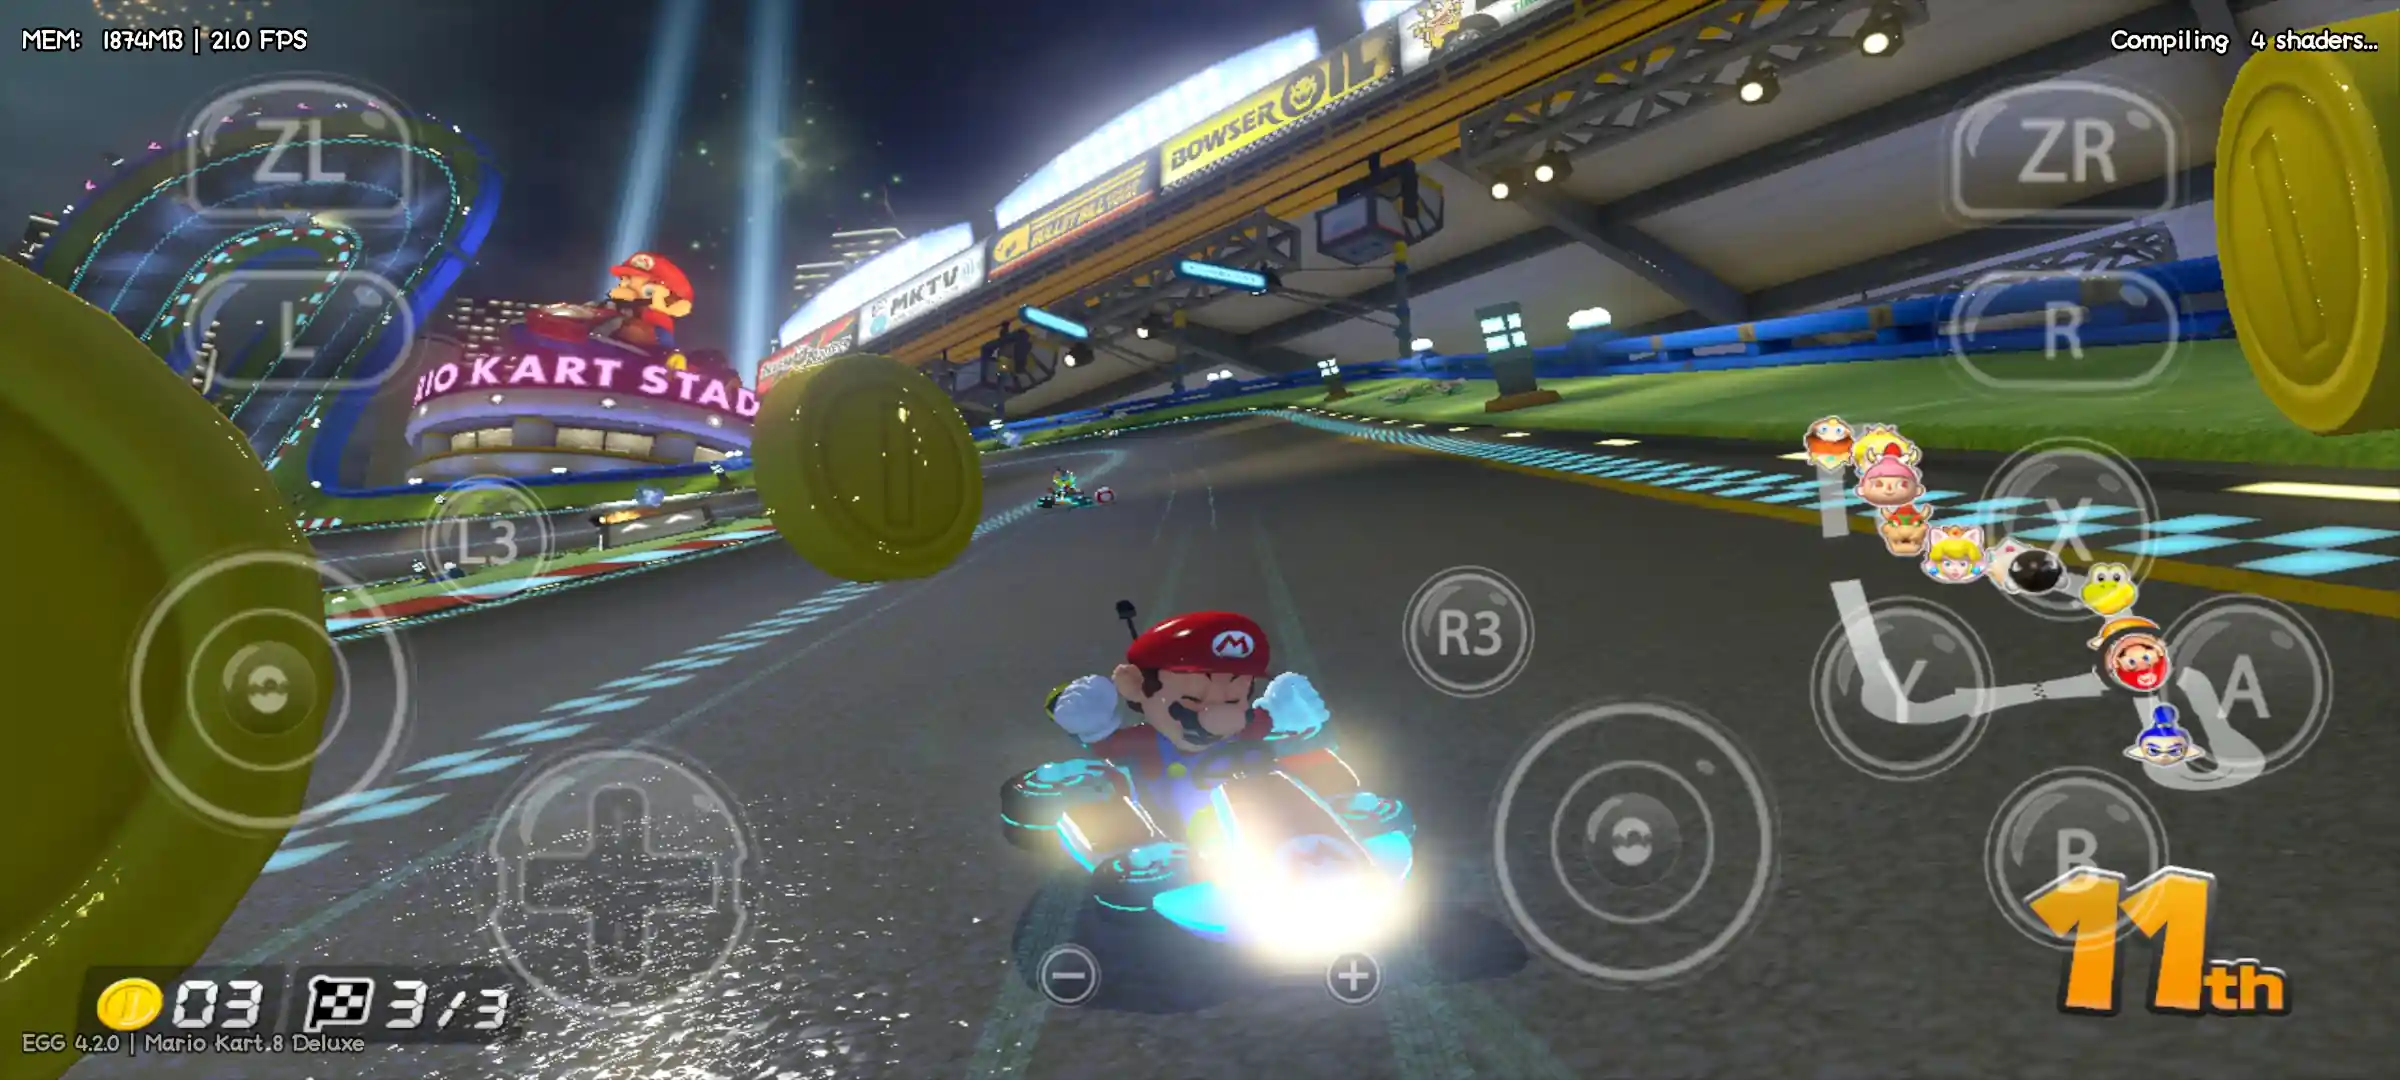 Super Mario Kart 8 Deluxe apk + obb android - Free Download - Nintendo Switch Emulator EGG NS